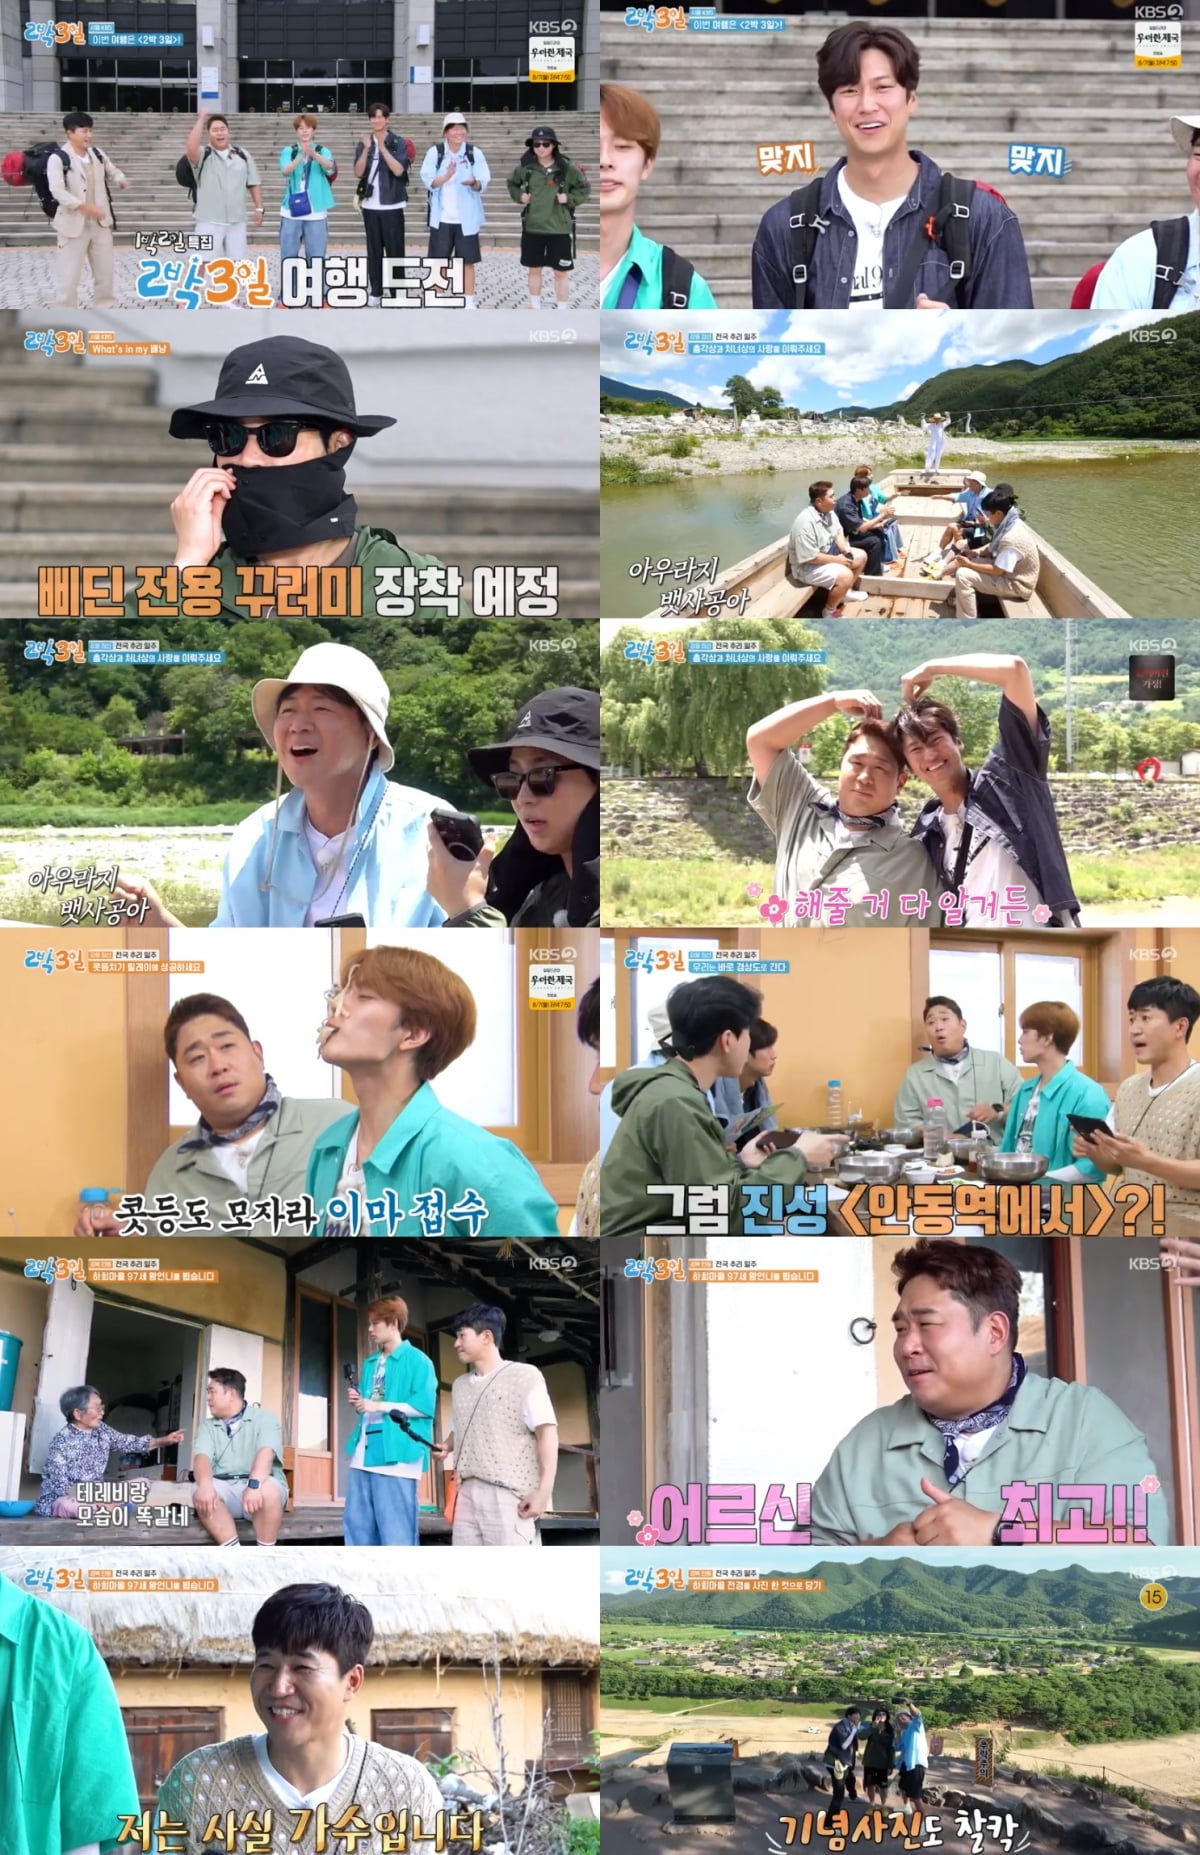 From Yeon Jung-hoon to Yoo Seon-ho, the first 2 nights and 3 days around the country